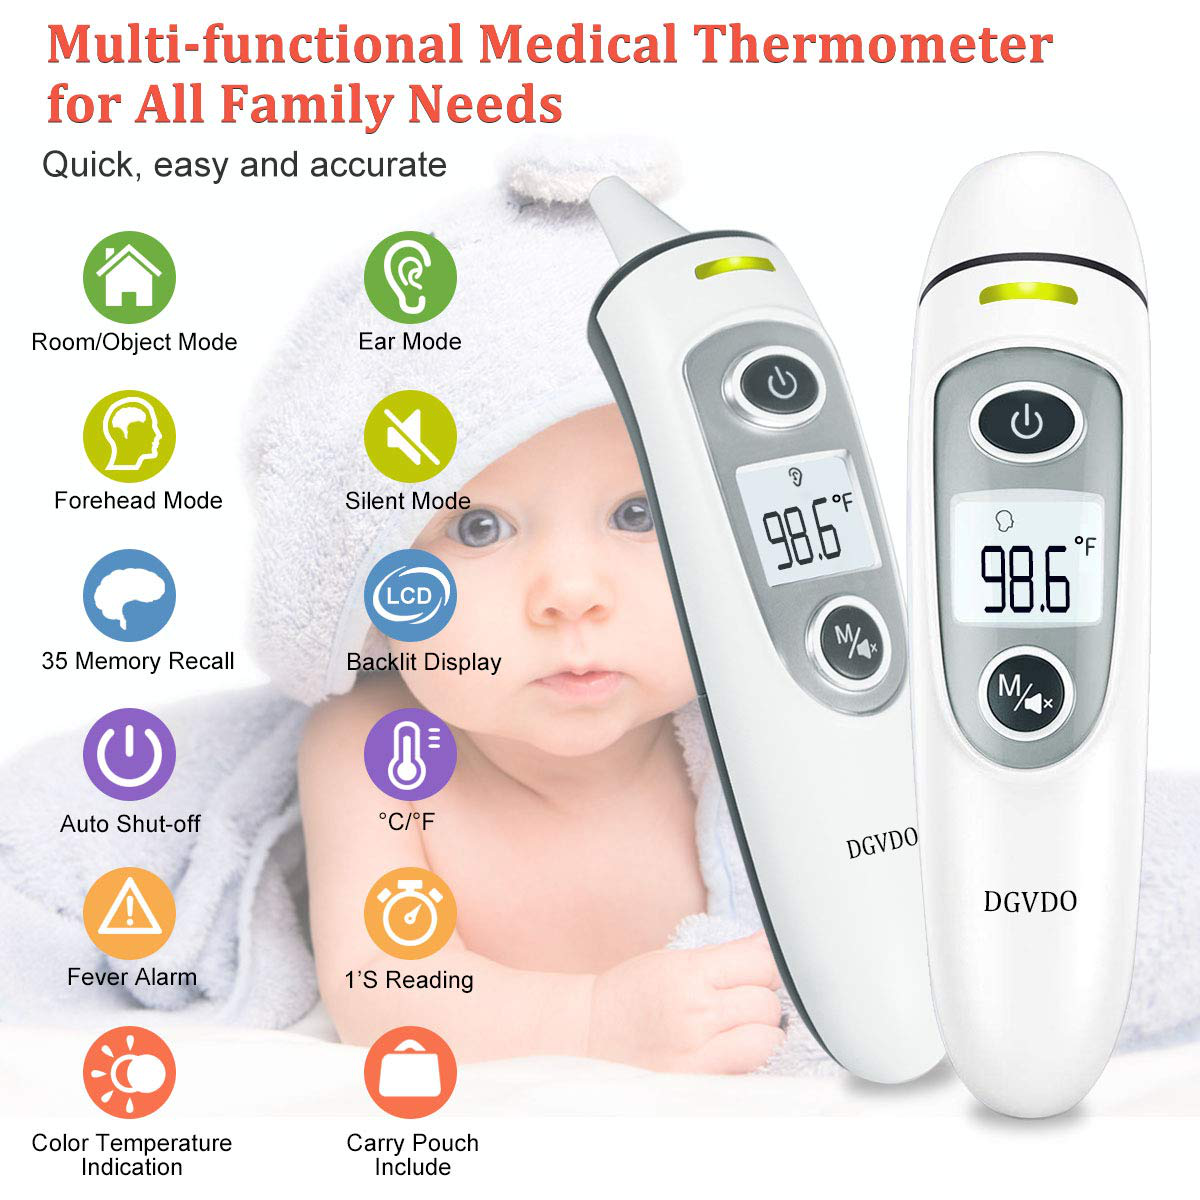 Non-Contact Forehead Thermometers, No Touch Digital Infrared Thermometer for Adults, Kids and Baby, Touchless Thermometer Within 0.4 Inch Distance, Fever Alarm, Memory Function